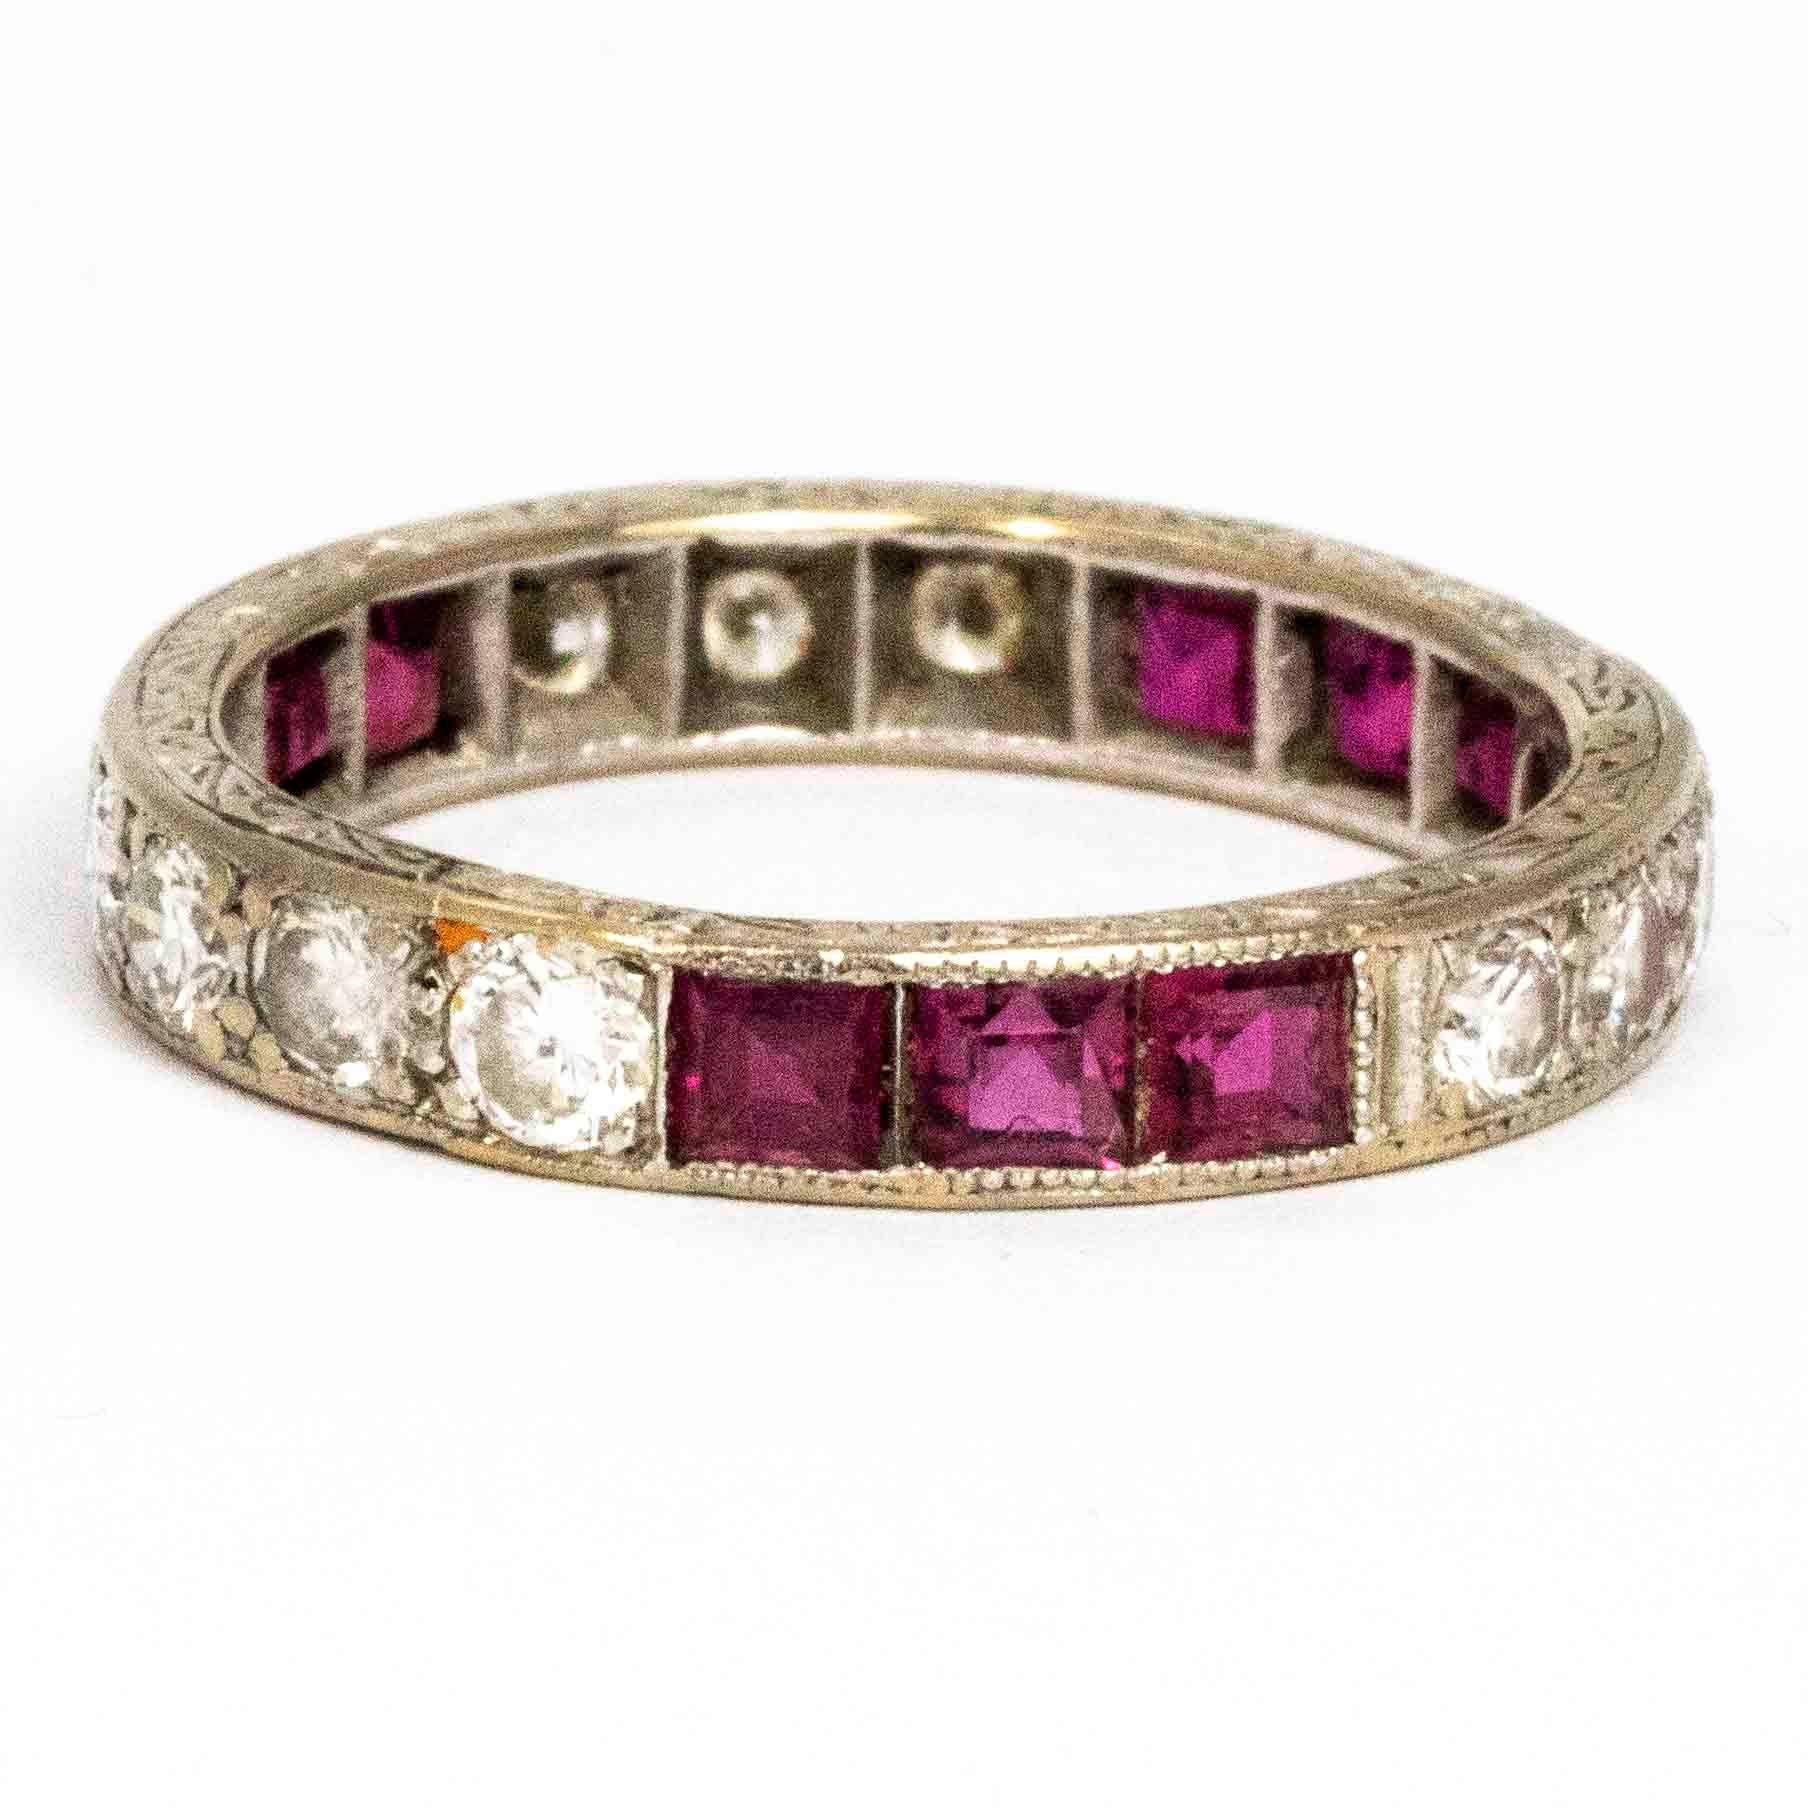 This full eternity ring is absolutely stunning! The ring boasts a total of 1.10ct of round cut diamonds and also hold square cut rubies. The stones are in collections of three or four and are all set in square settings. The band itself is engraved